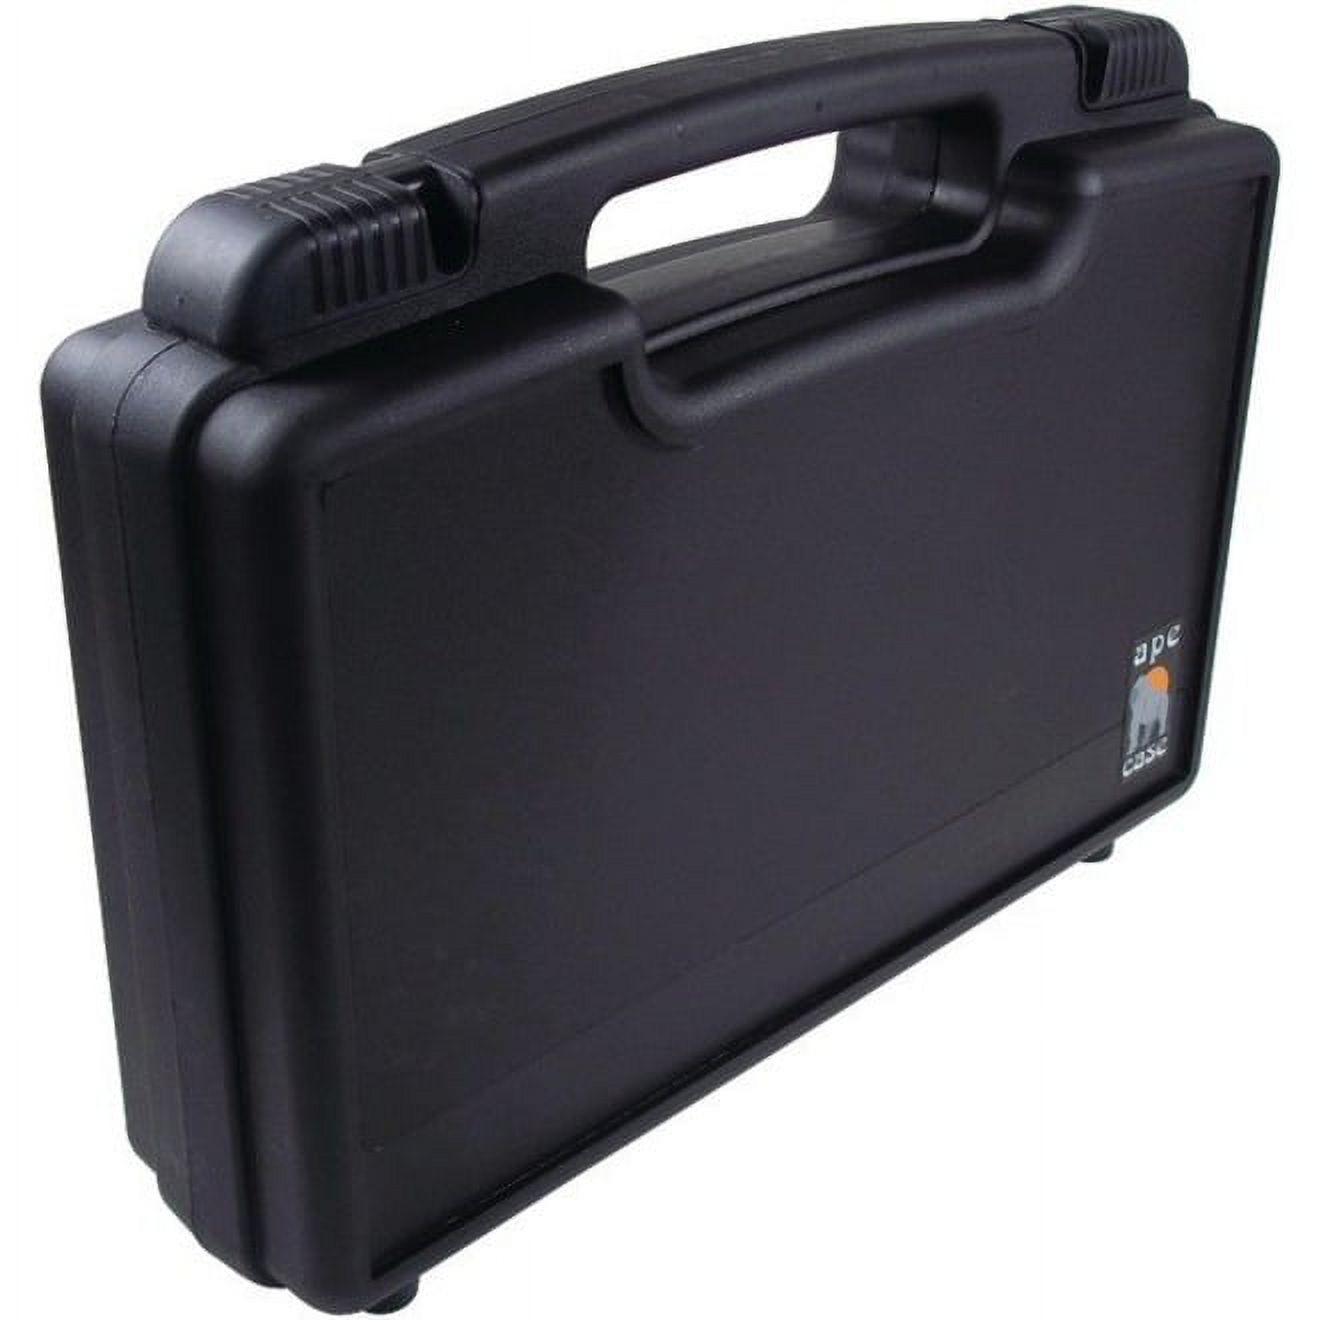 Ape Case Protective Briefcase with Foam - image 1 of 9